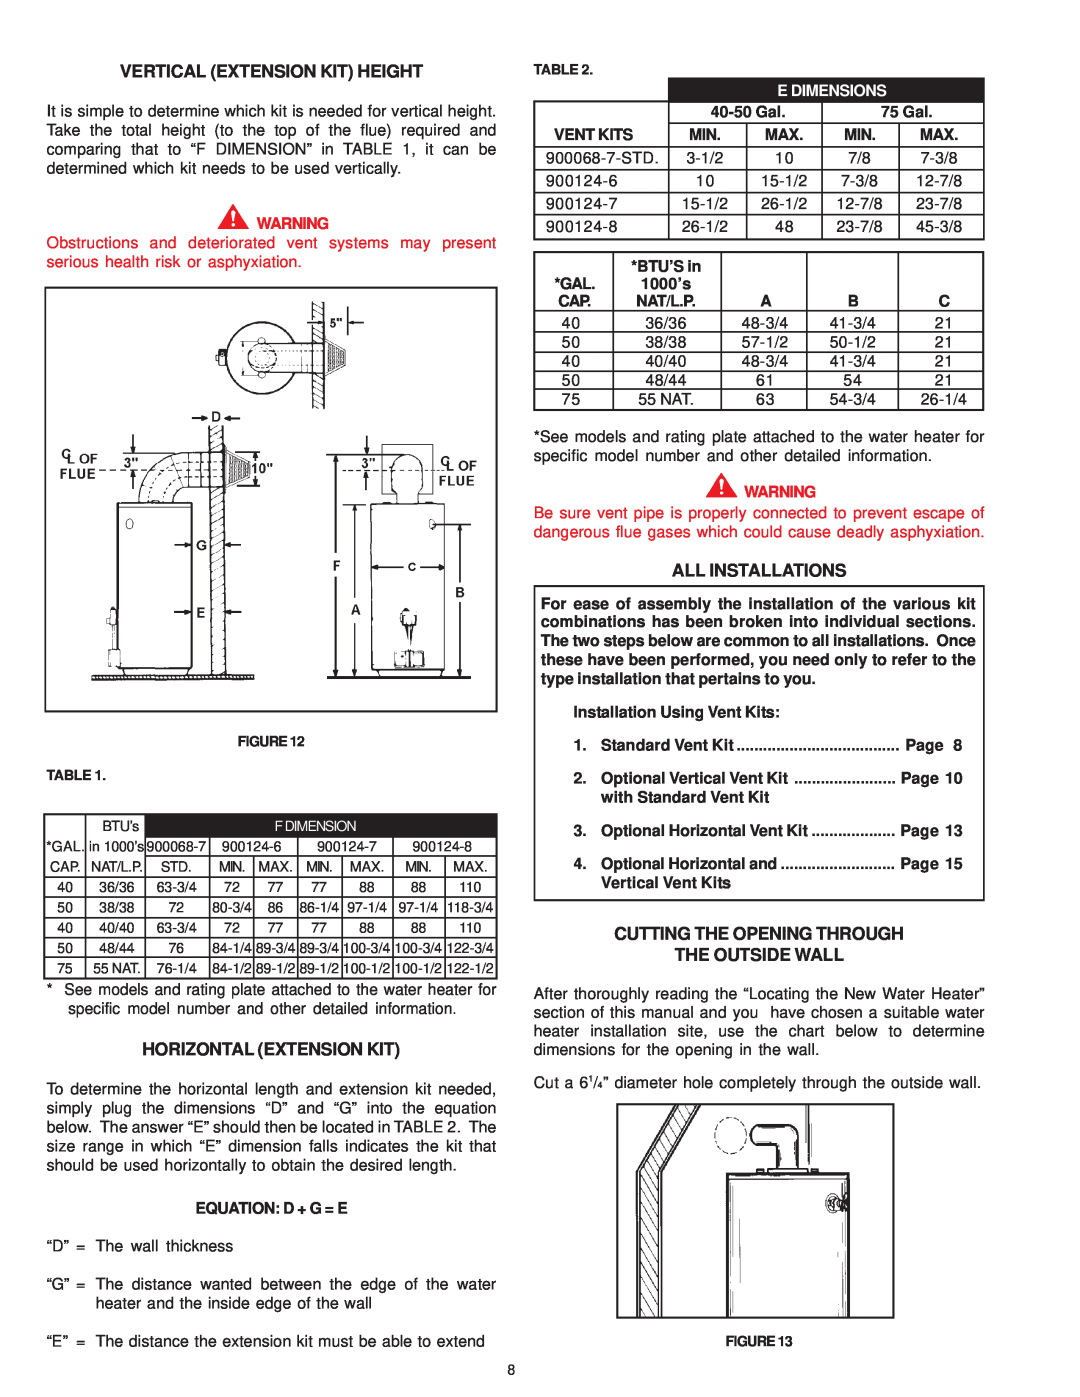 A.O. Smith GDVH Vertical Extension Kit Height, Horizontal Extension Kit, All Installations, Equation D + G = E, Vent Kits 